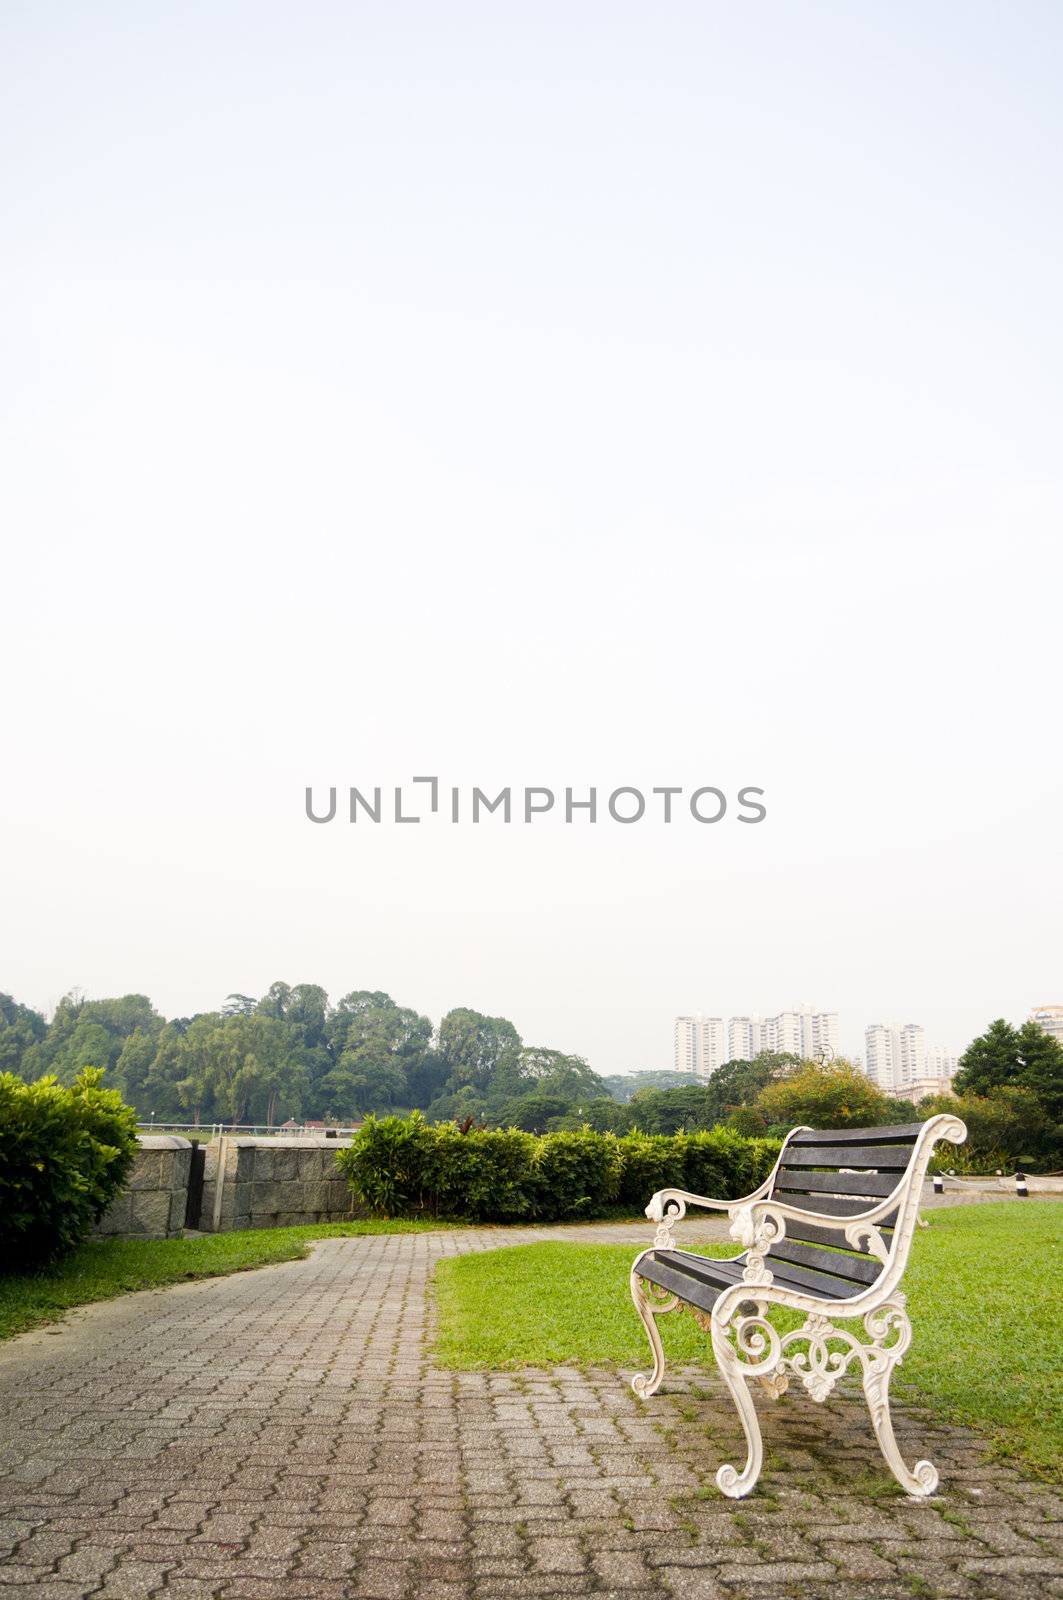 Empty bench in a park, to convey a feeling of waiting or expecting for the future or time passing.
